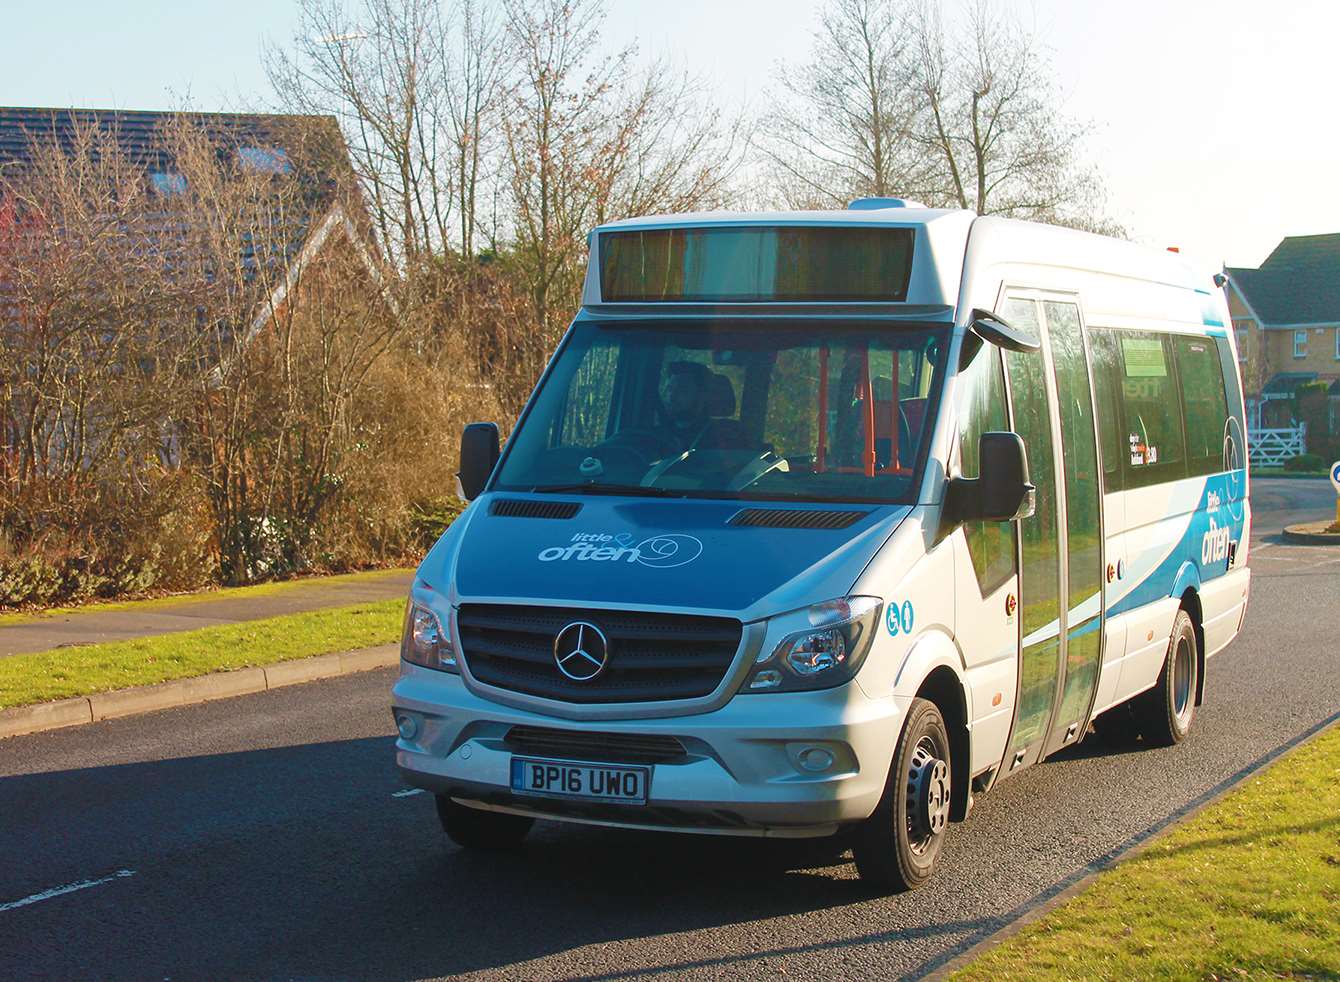 The new 'little & often' service will operate across the town